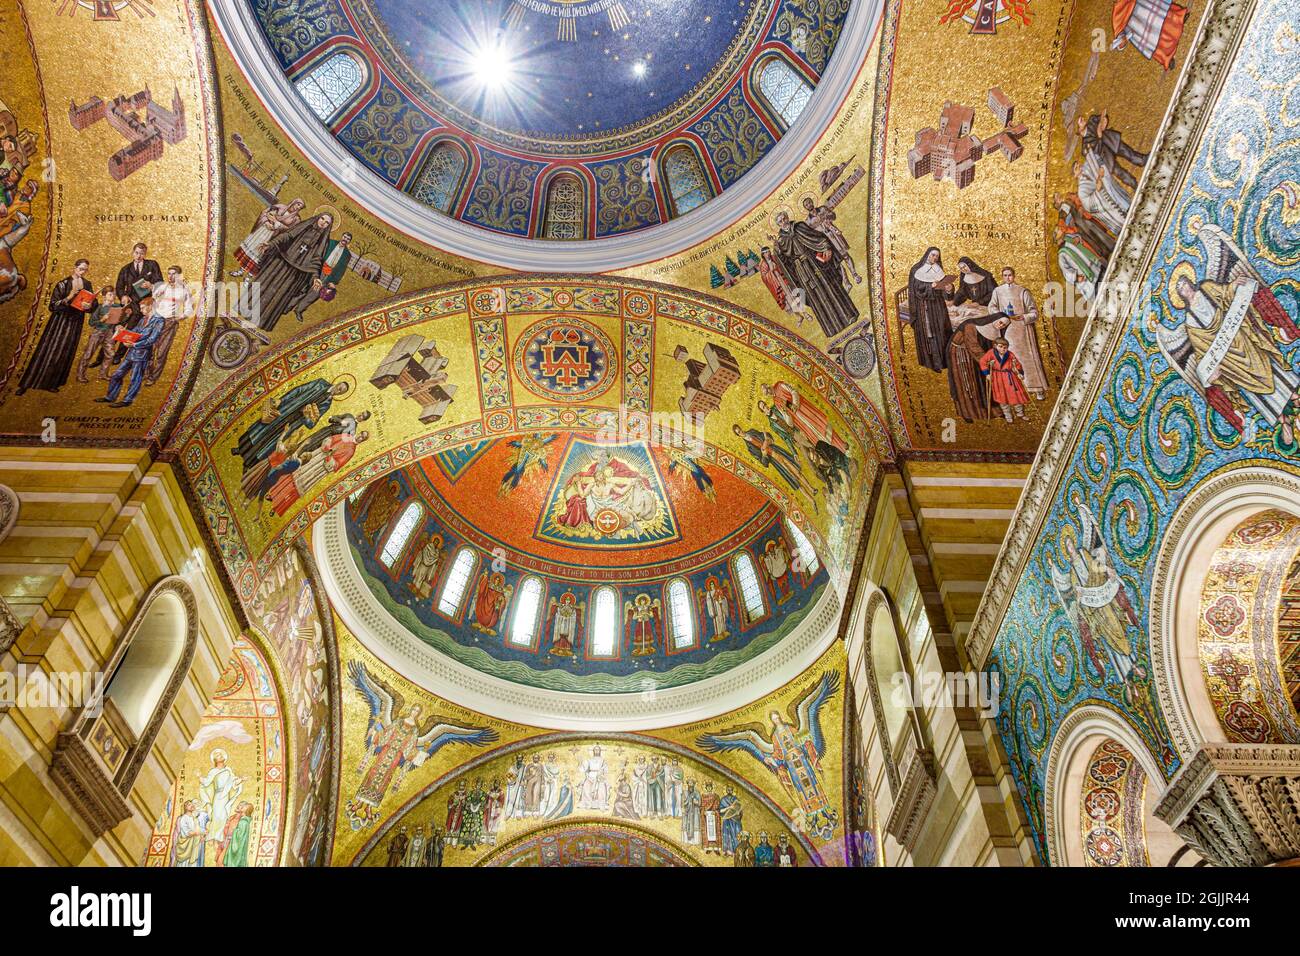 Saint St. Louis Missouri,Central West End,Cathedral Basilica of Saint Louis Catholic church,Byzantine Revival dome mosaic interior inside looking up Stock Photo